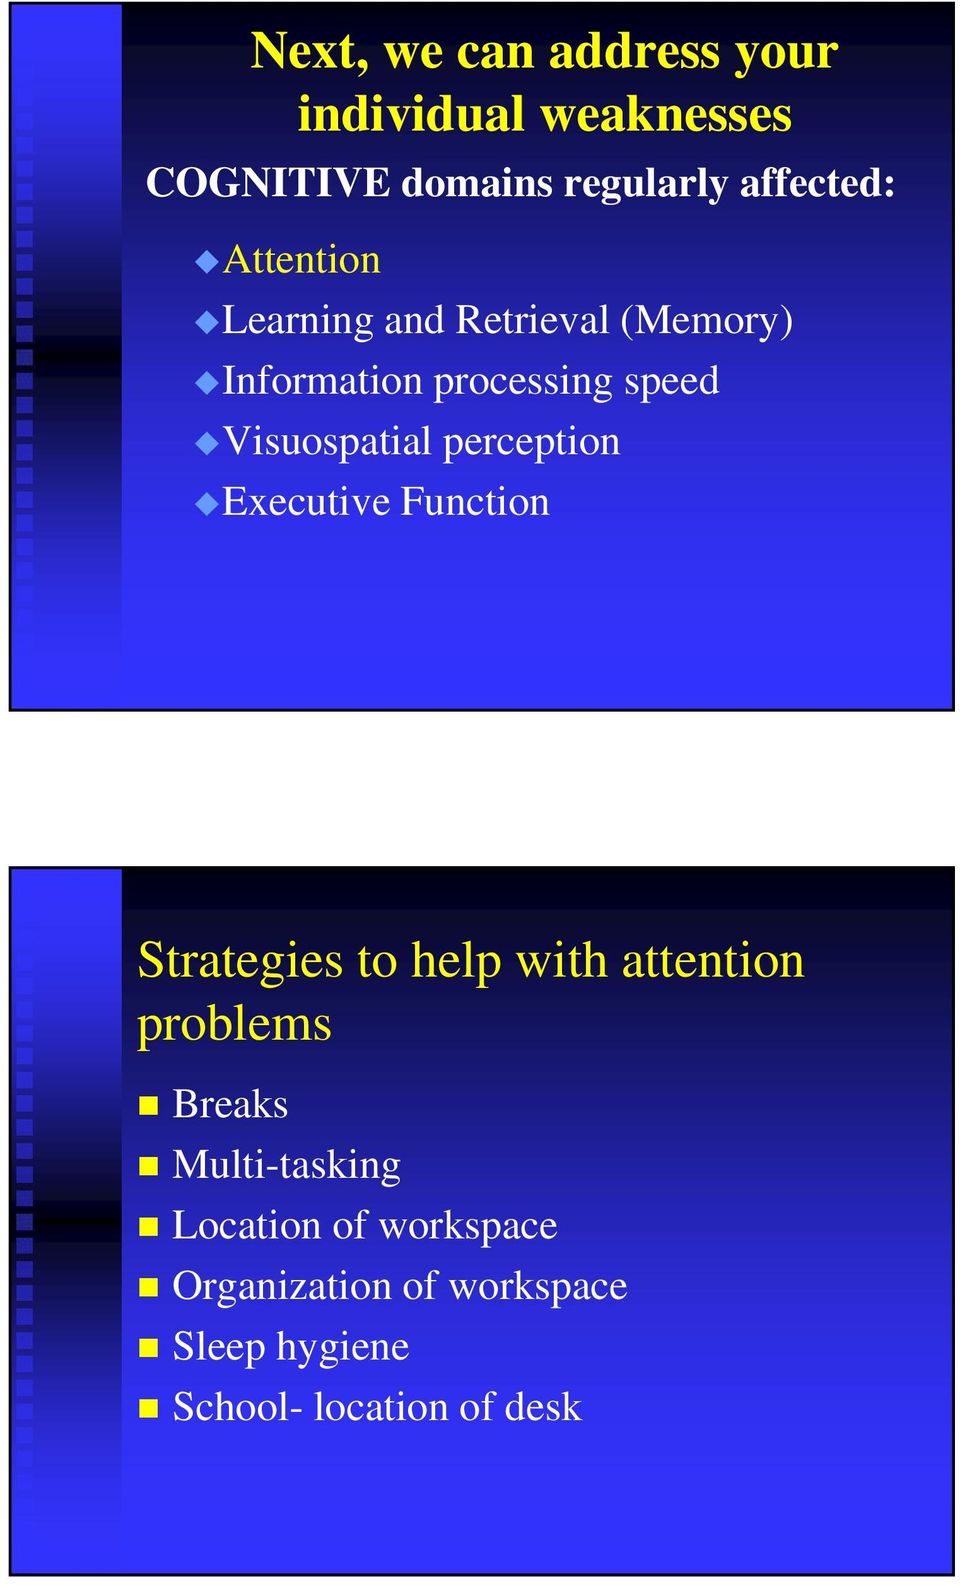 perception Executive Function Strategies to help with attention problems Breaks